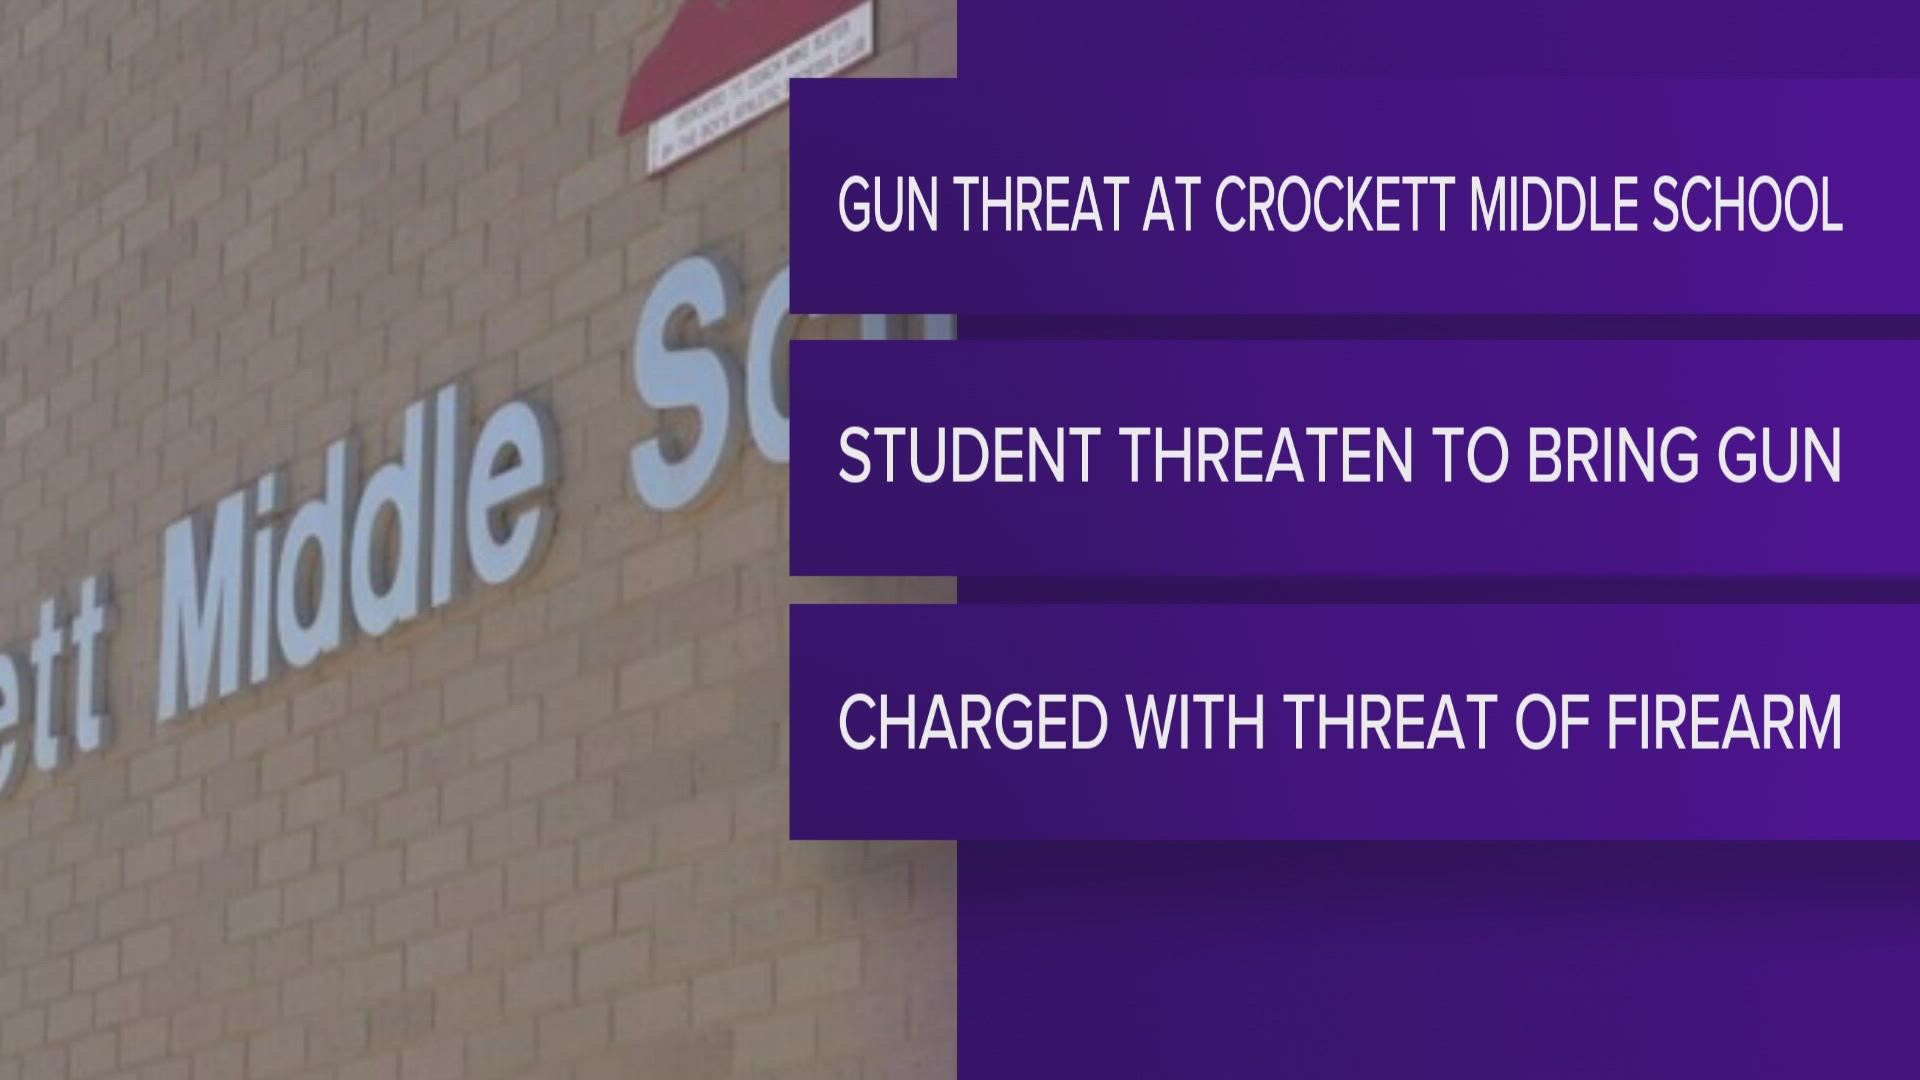 ECISD officers determined the student did not have a weapon, but he is being charged with exhibition or threat of a firearm.